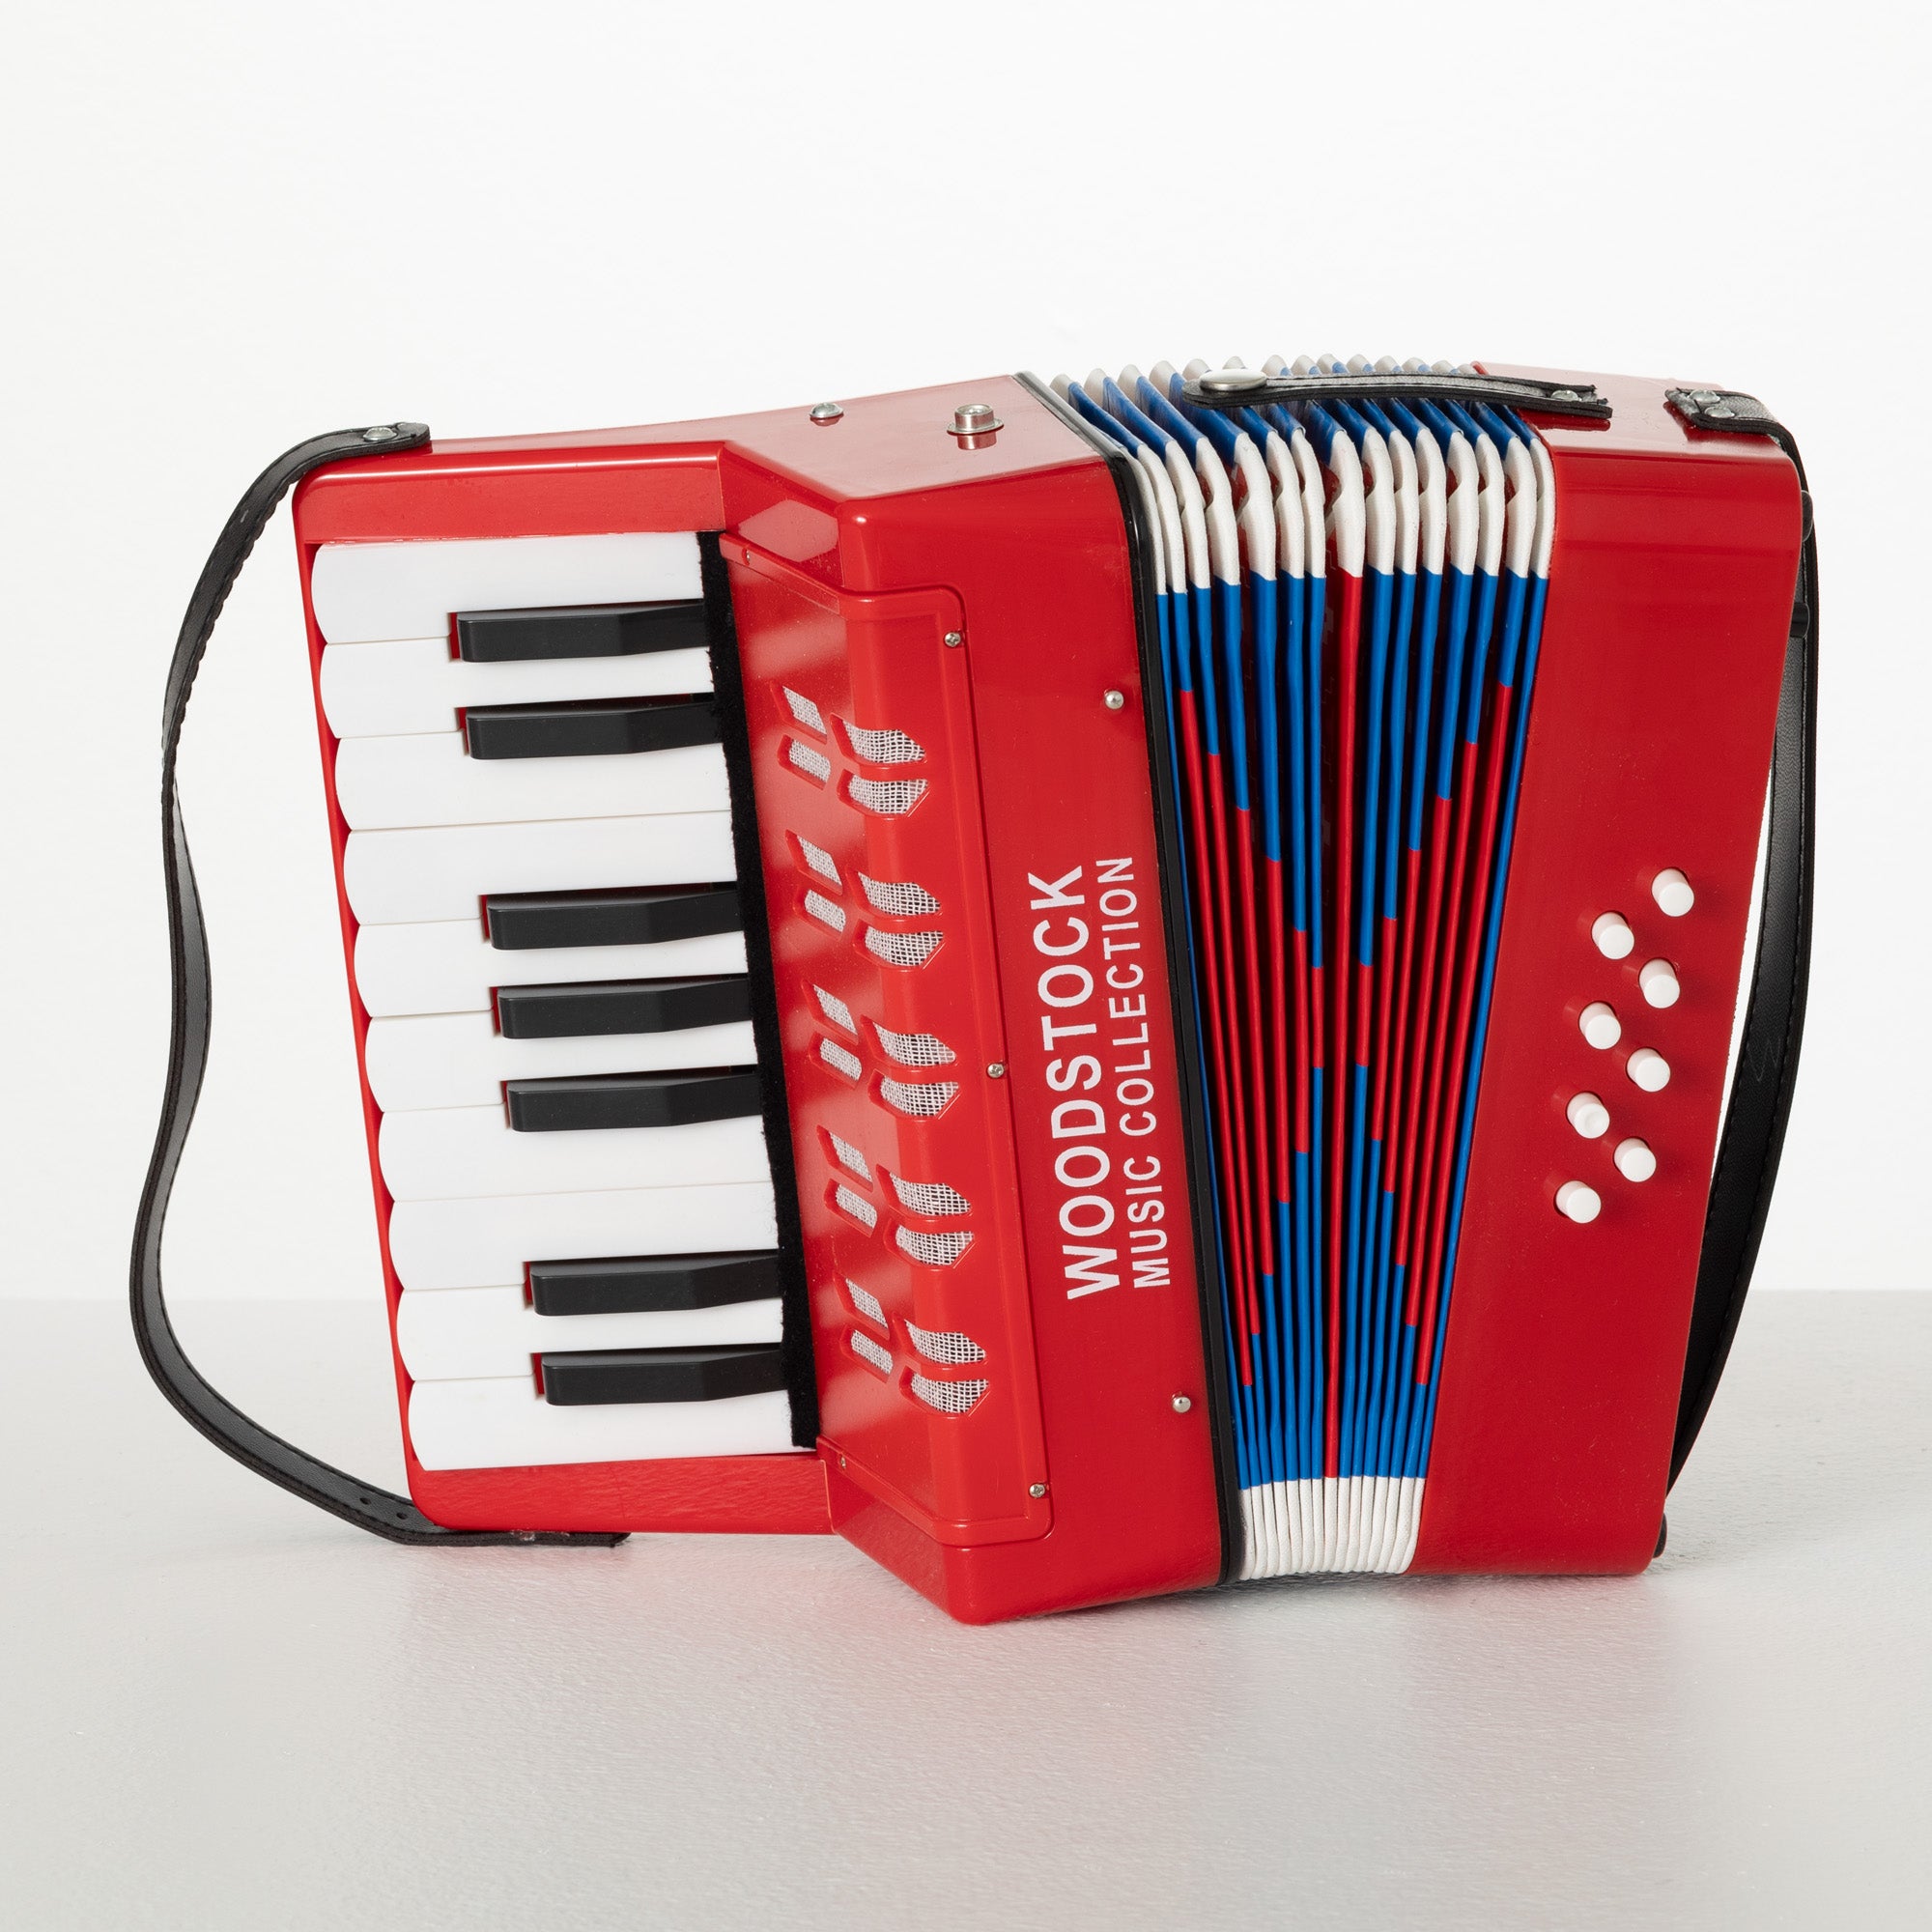 Woodstock Kid's Accordion - Trees n Trends - Home, Fashion & MORE!